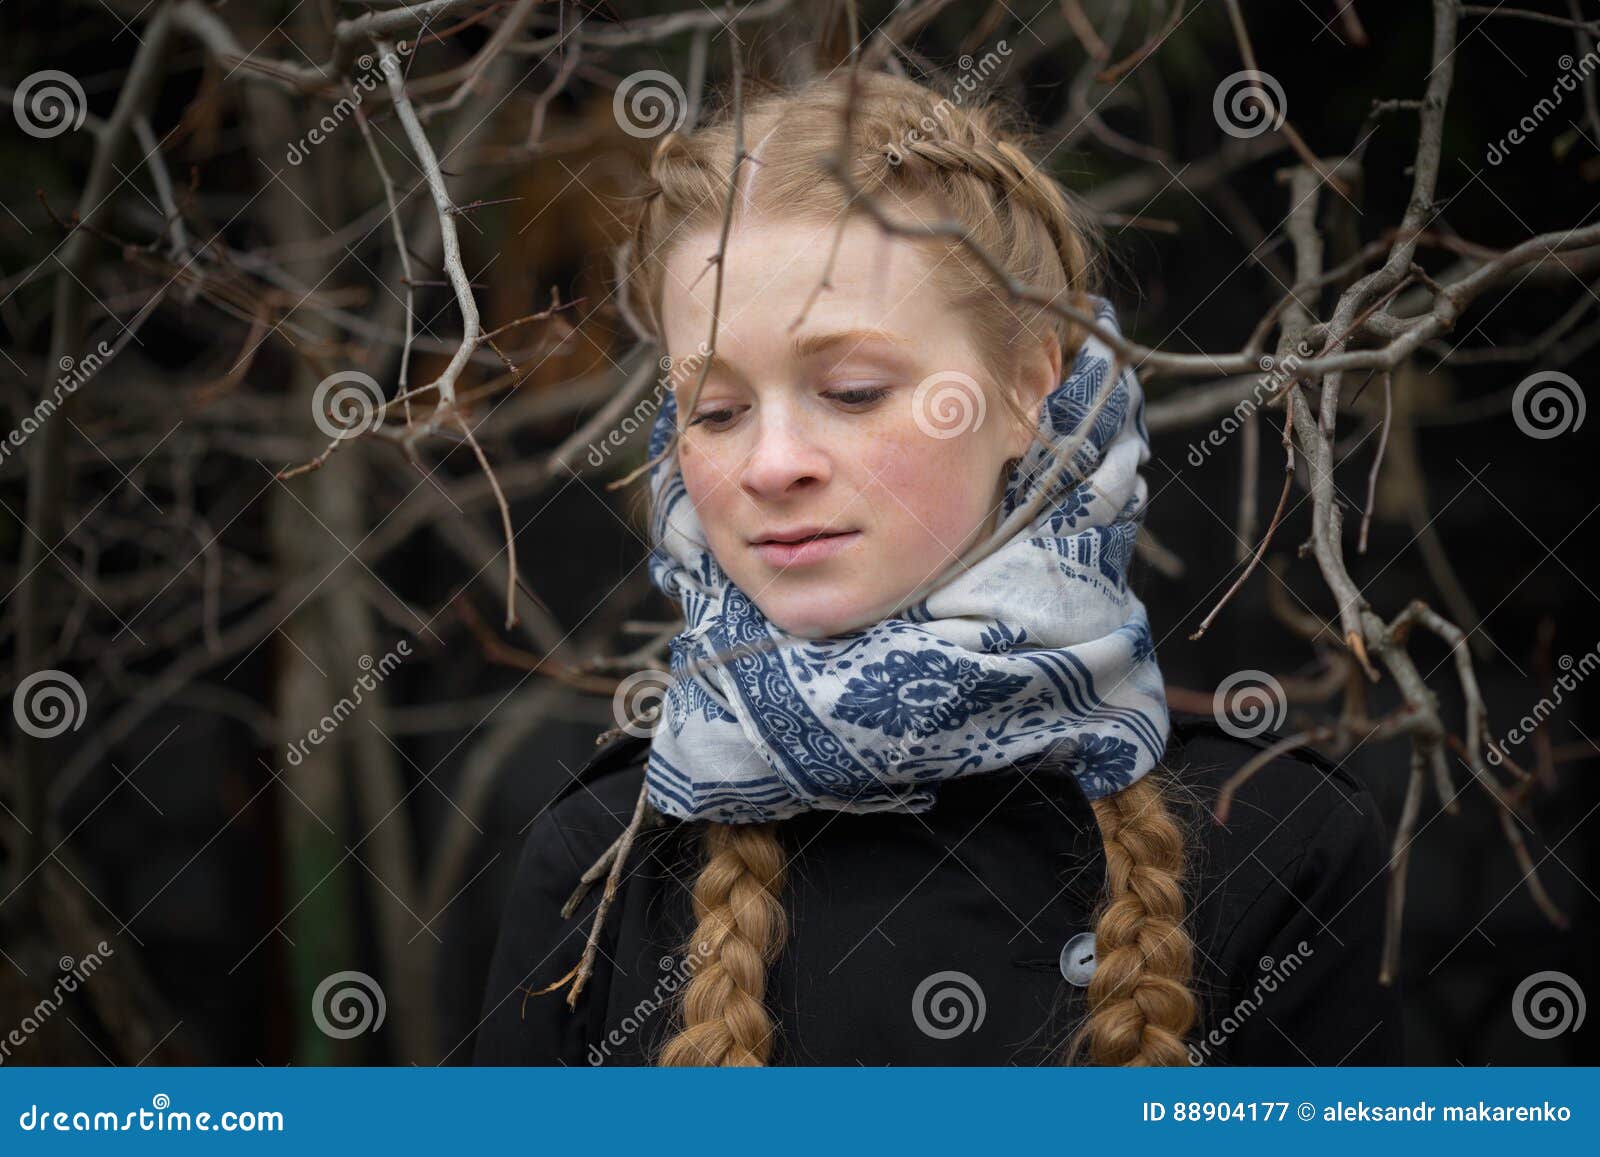 Portrait of a Beautiful Girl in the Bush Outdoors Stock Image - Image ...